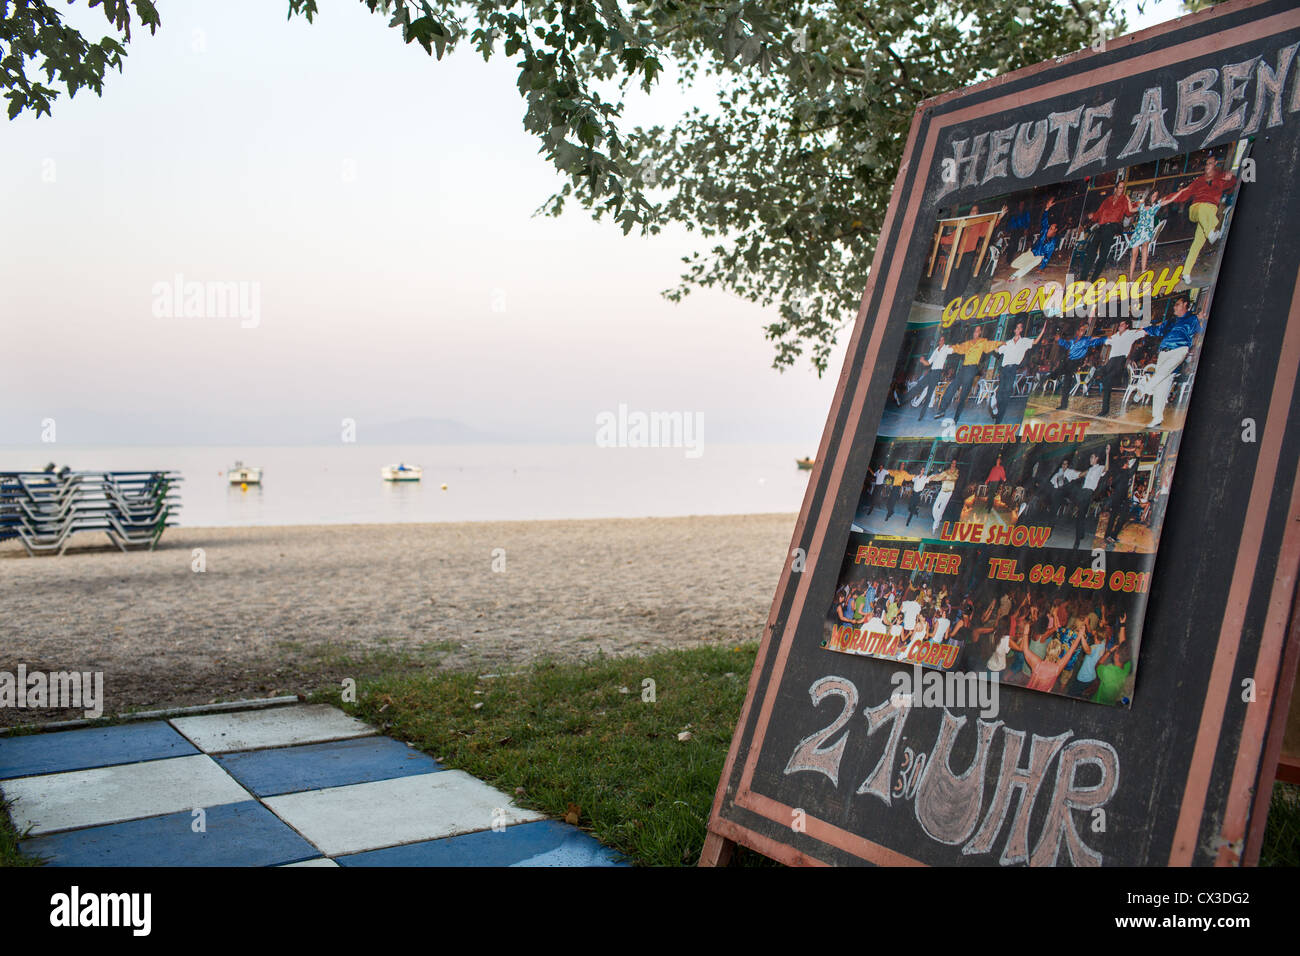 Information sign an the beach advertises a restaurant in Moraitika, Corfu, Ionian Islands, Greece. Stock Photo